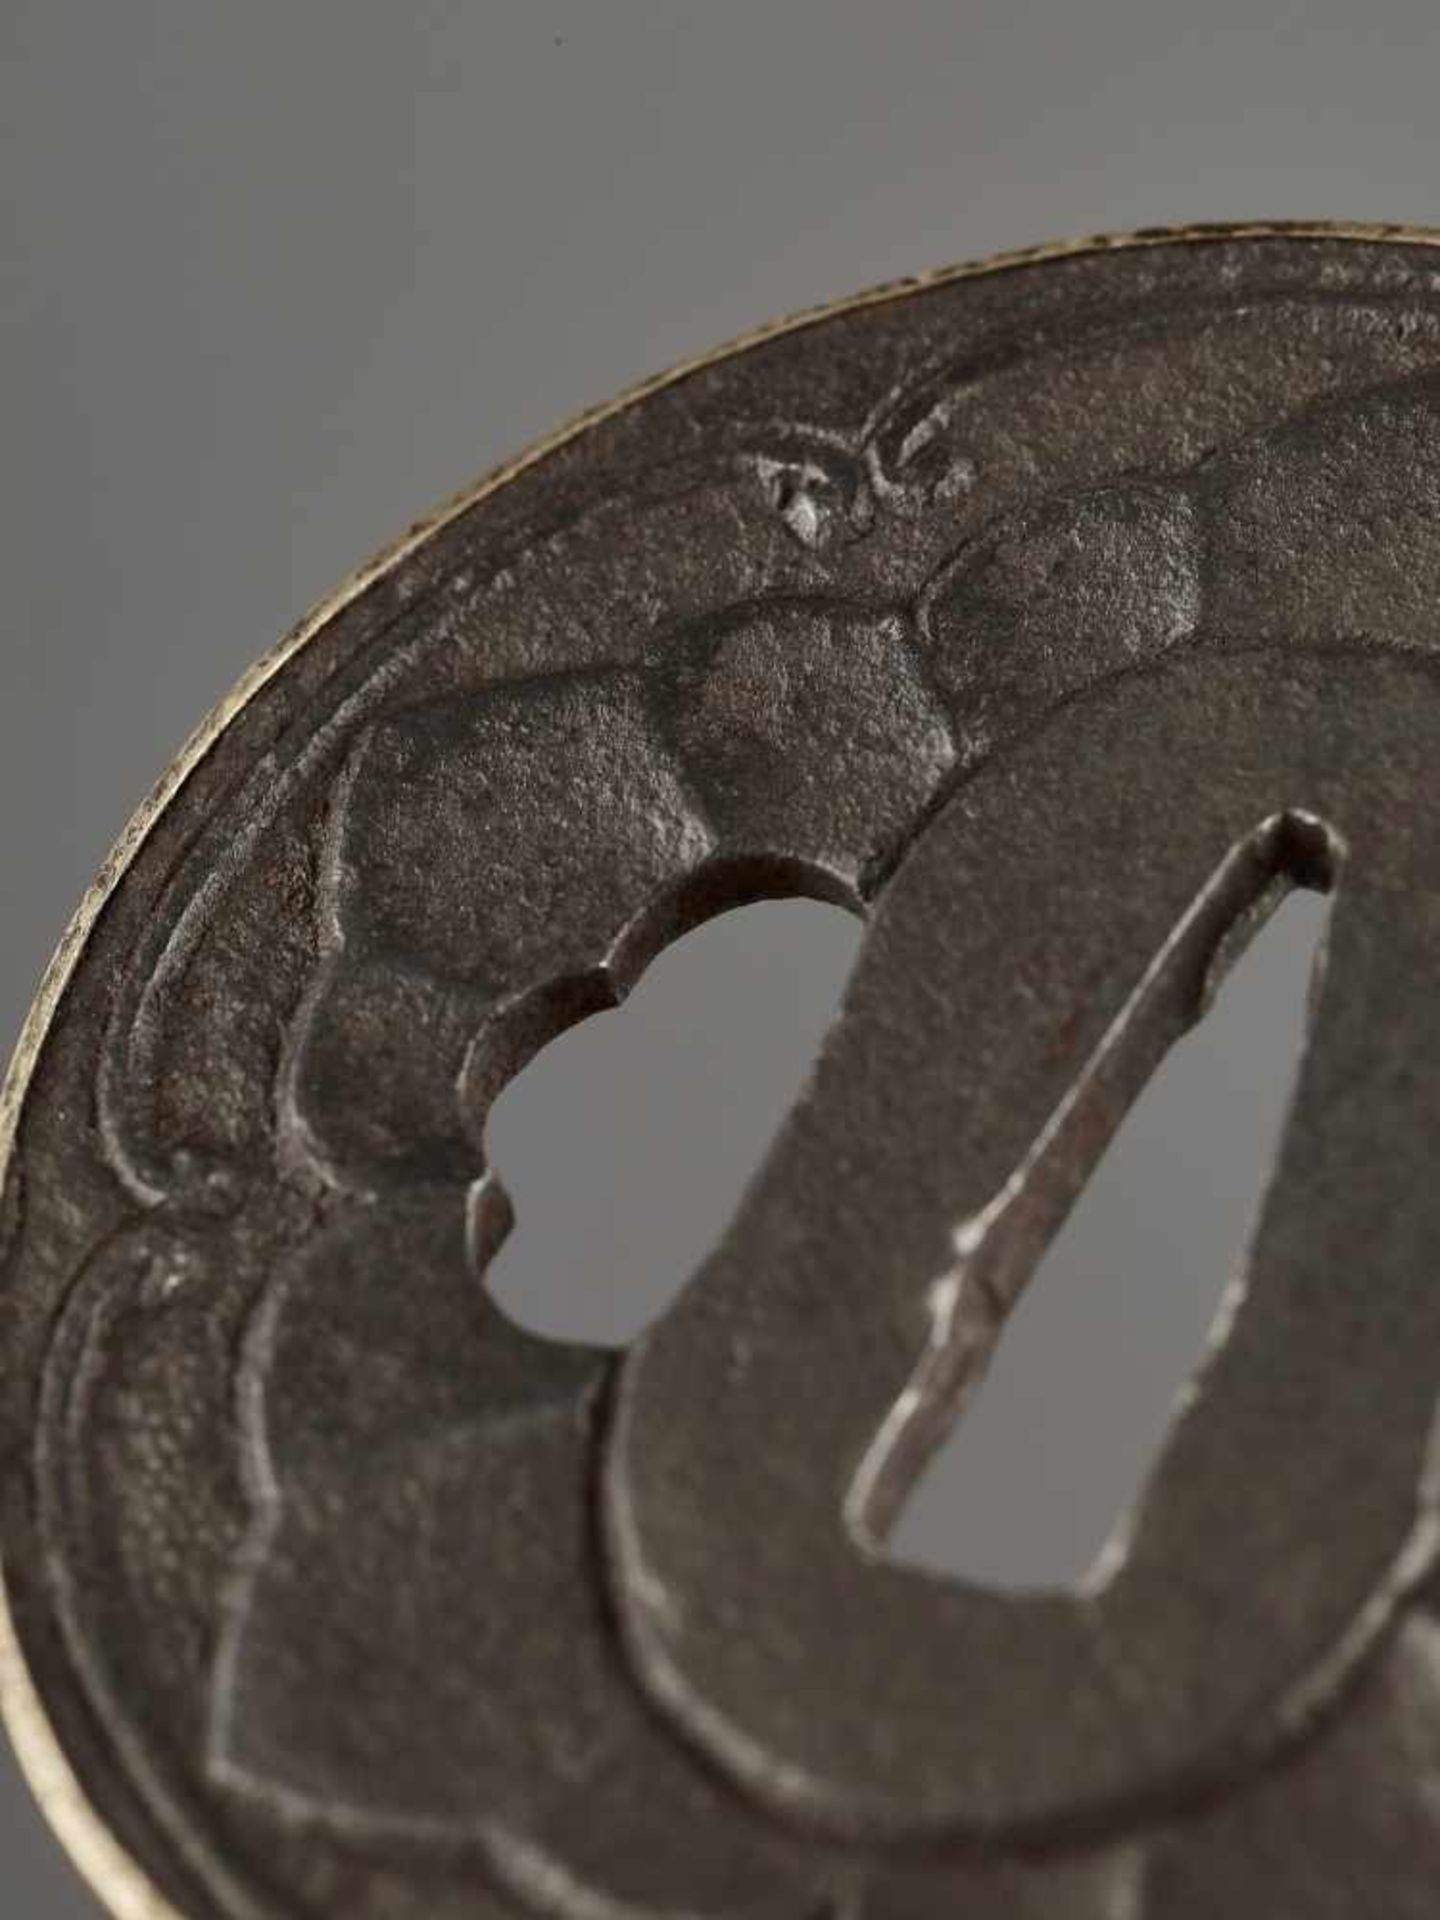 AN IRON TSUBA WITH MON CREST IronJapan, Edo period (1615-1868)Of Maru Gata shape with a raised and - Image 2 of 4